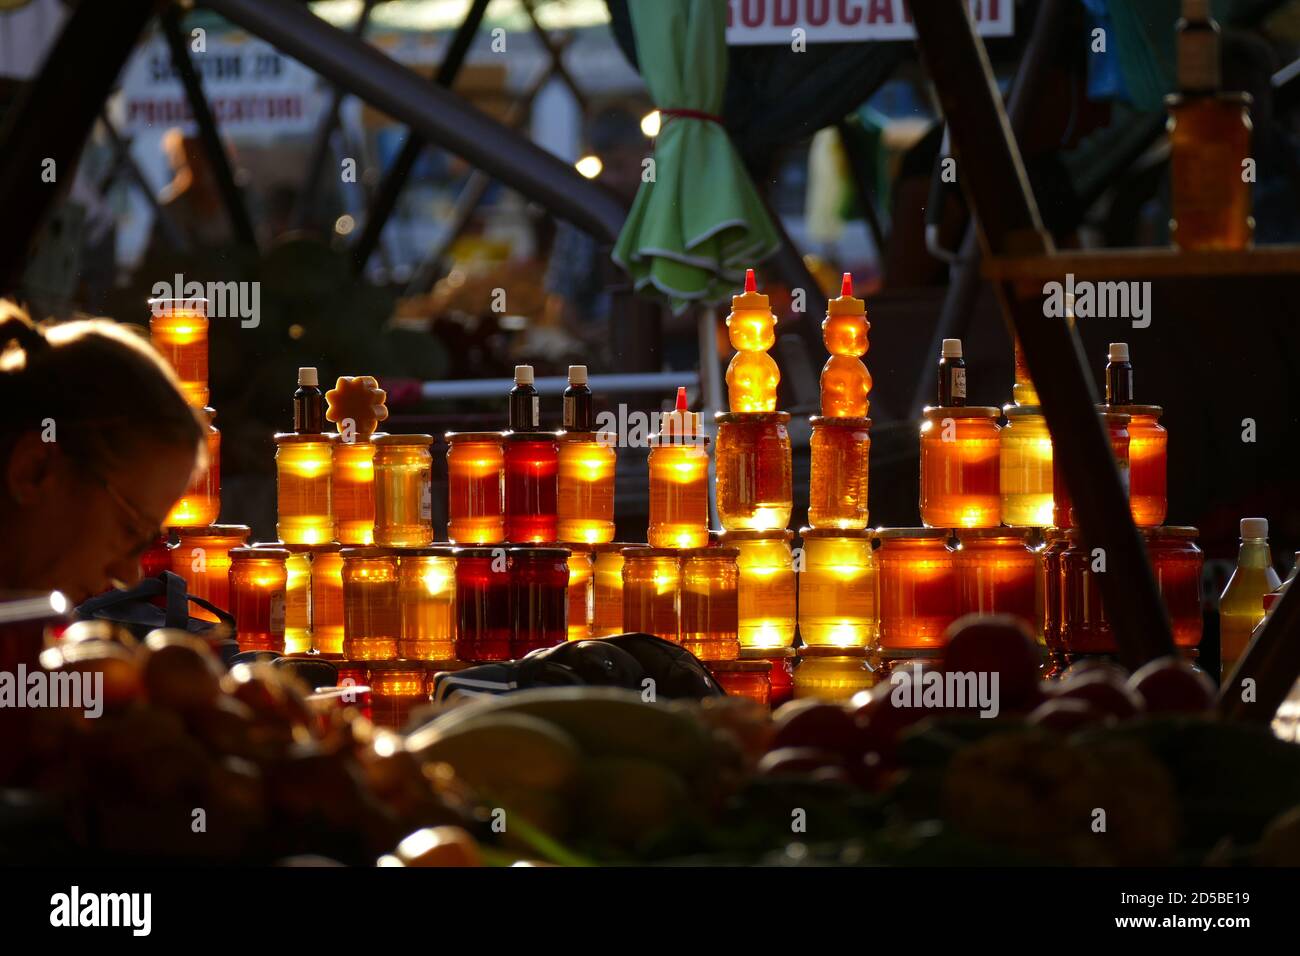 The sun sets over a honey seller's stall in the Transylvanian city of Sibiu, bringing a natural golden glow to the honey. Picture by Adam Alexander Stock Photo